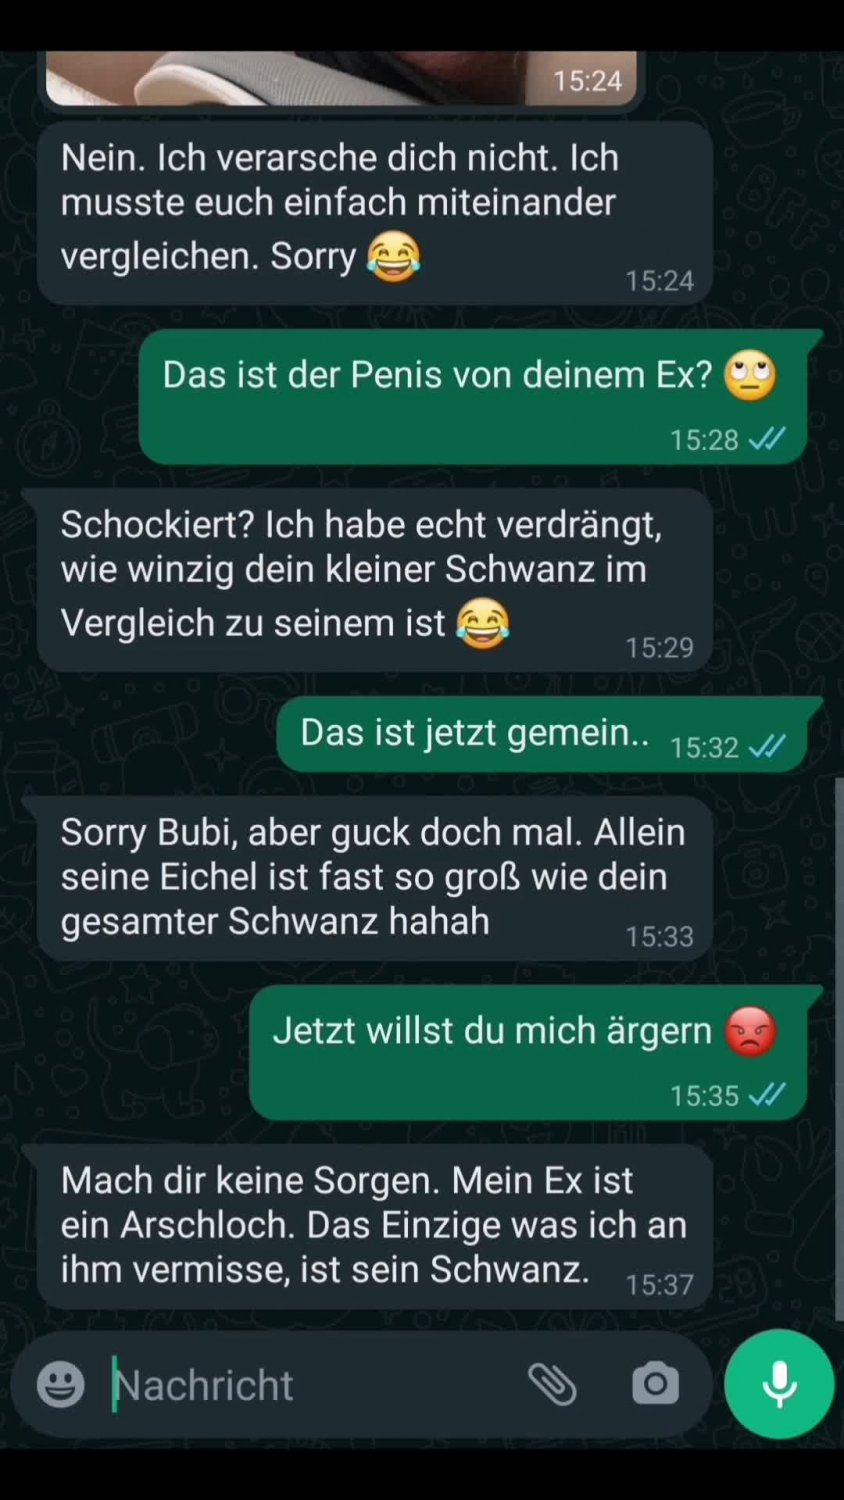 Small penis humiliation WhatsApp Chat (German) pic